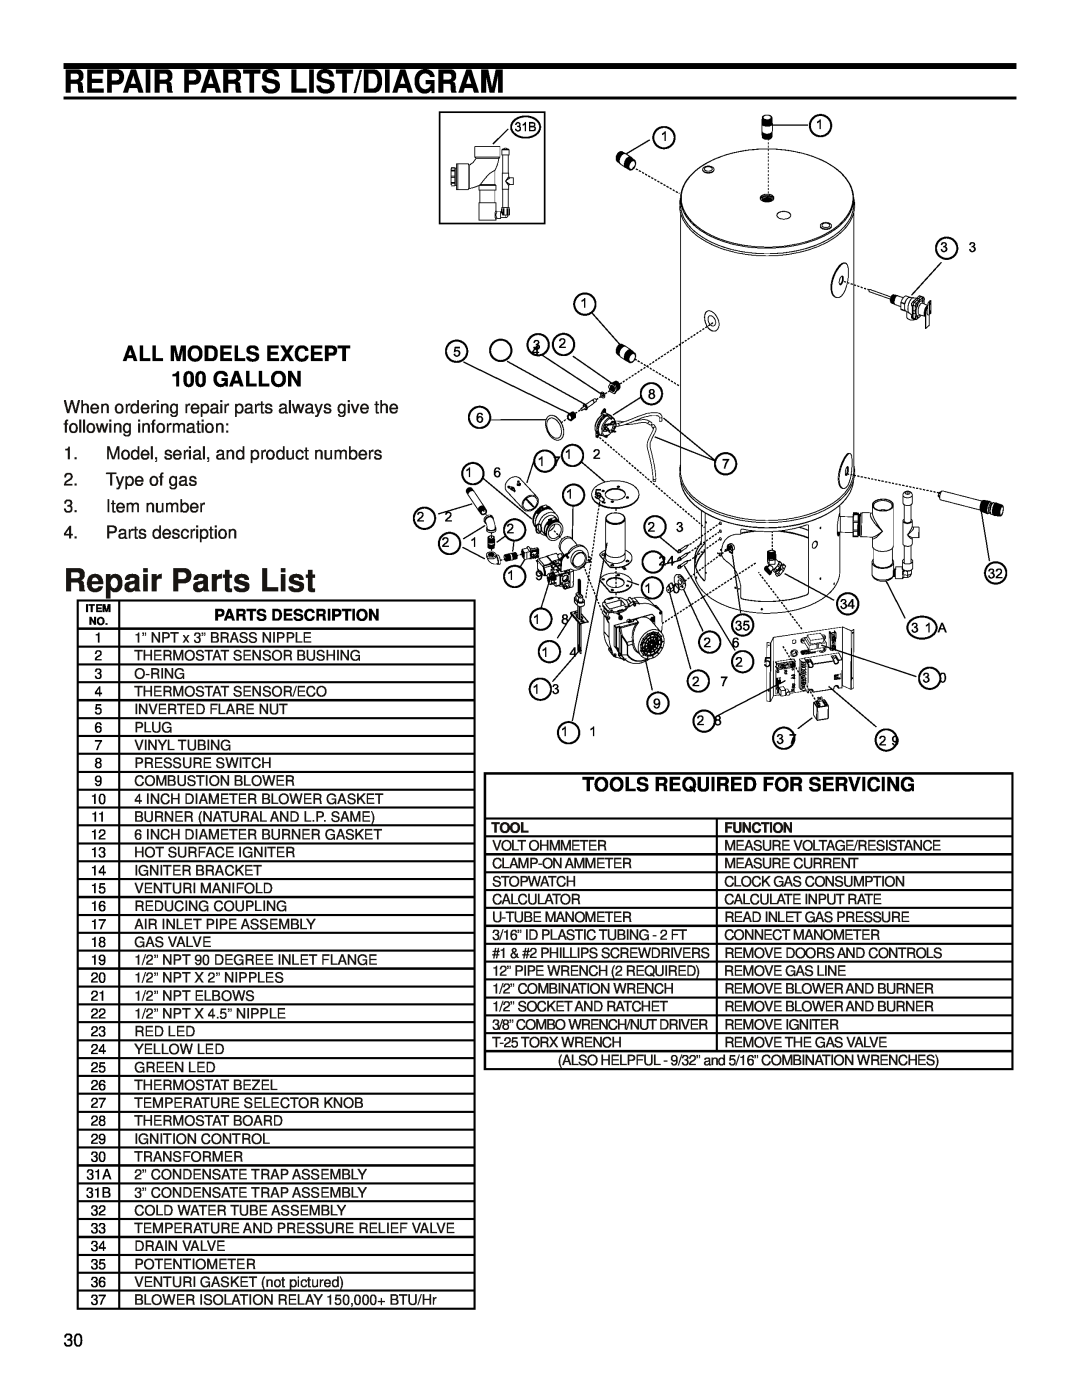 American International PG10*34-130-2NV or 2PV Repair Parts List/Diagram, Tools Required For Servicing, Parts Description 